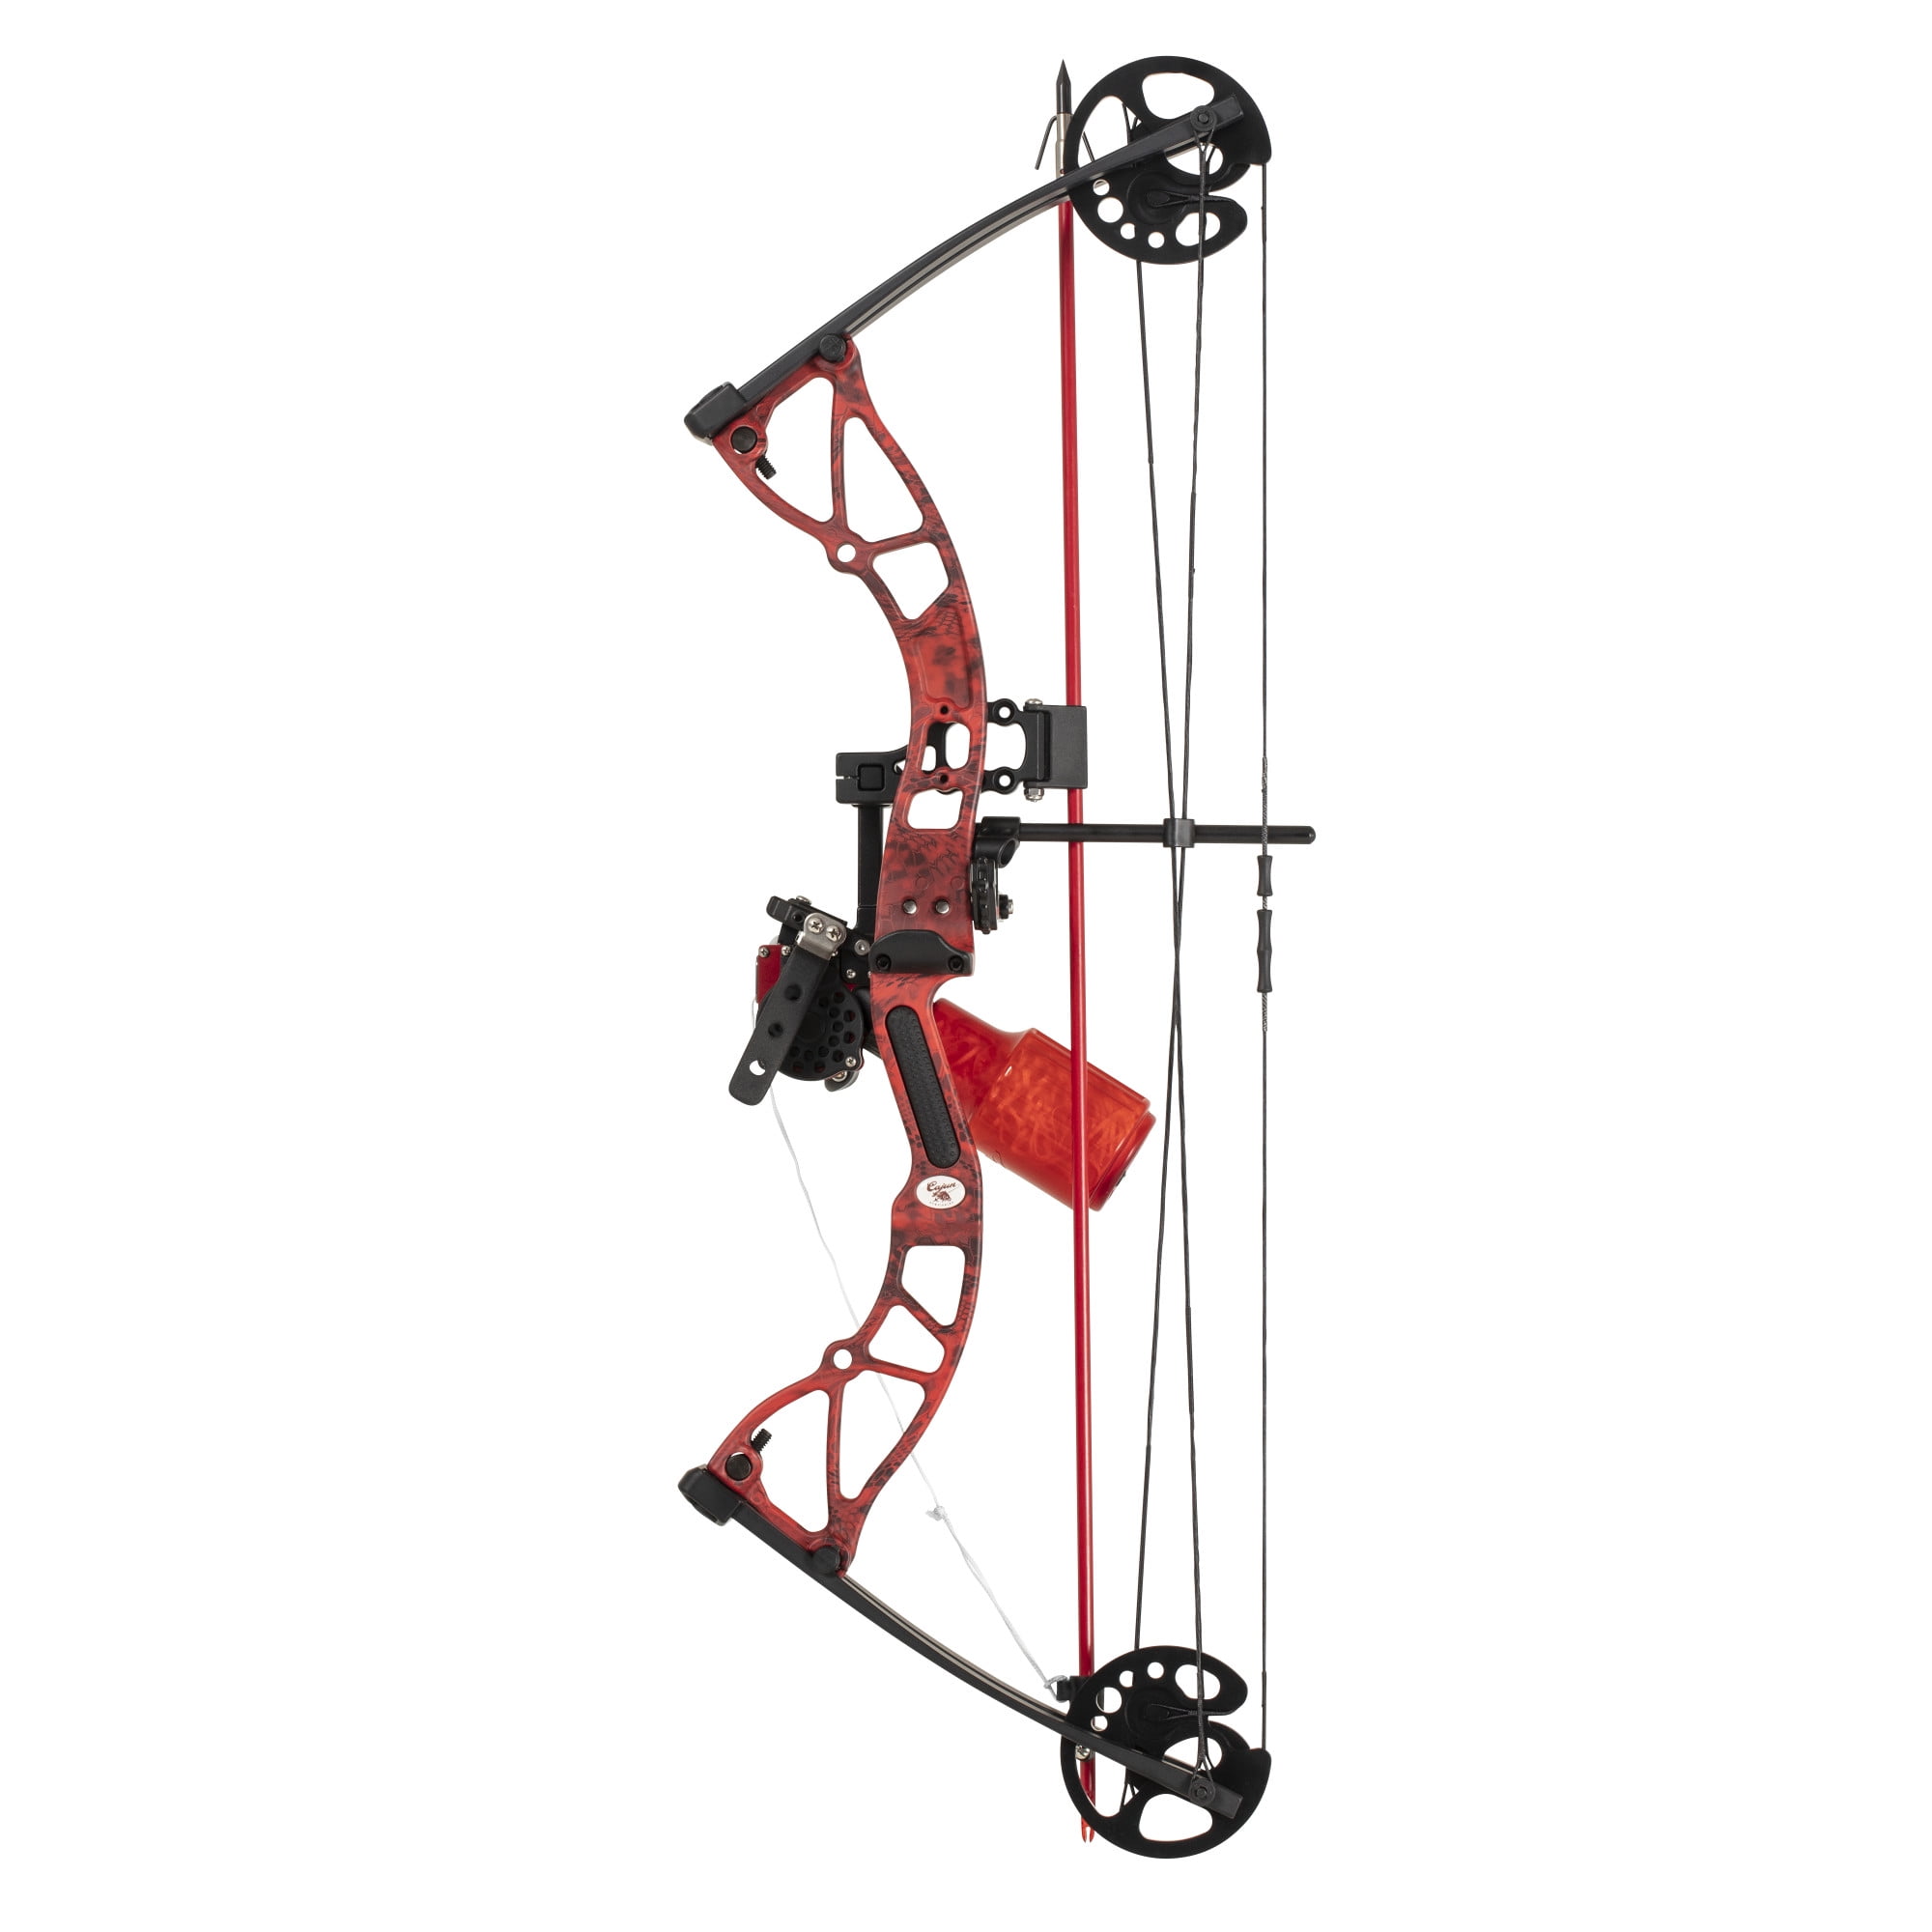 Cajun Bowfishing Shore Runner Ext Compound Bowfishing Bow Ready to Fish Kit  with Brush Fire Arrow Rest, Bowfishing Bottle Reel, Blister Buster Finger